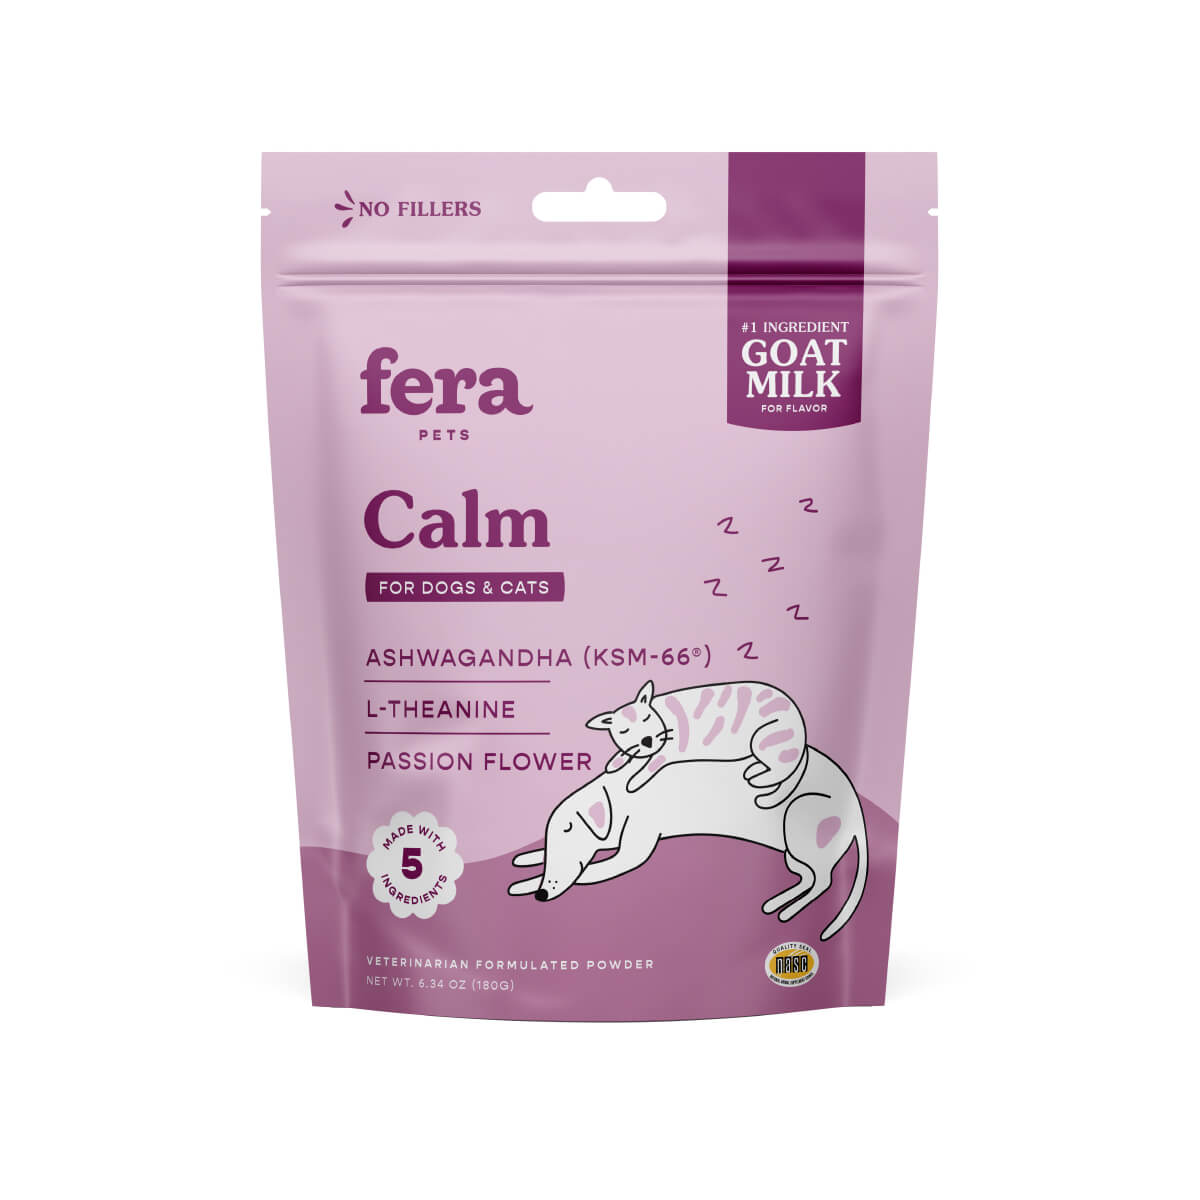 Fera Pets Calm Goat Milk Topper For Dogs & Cats